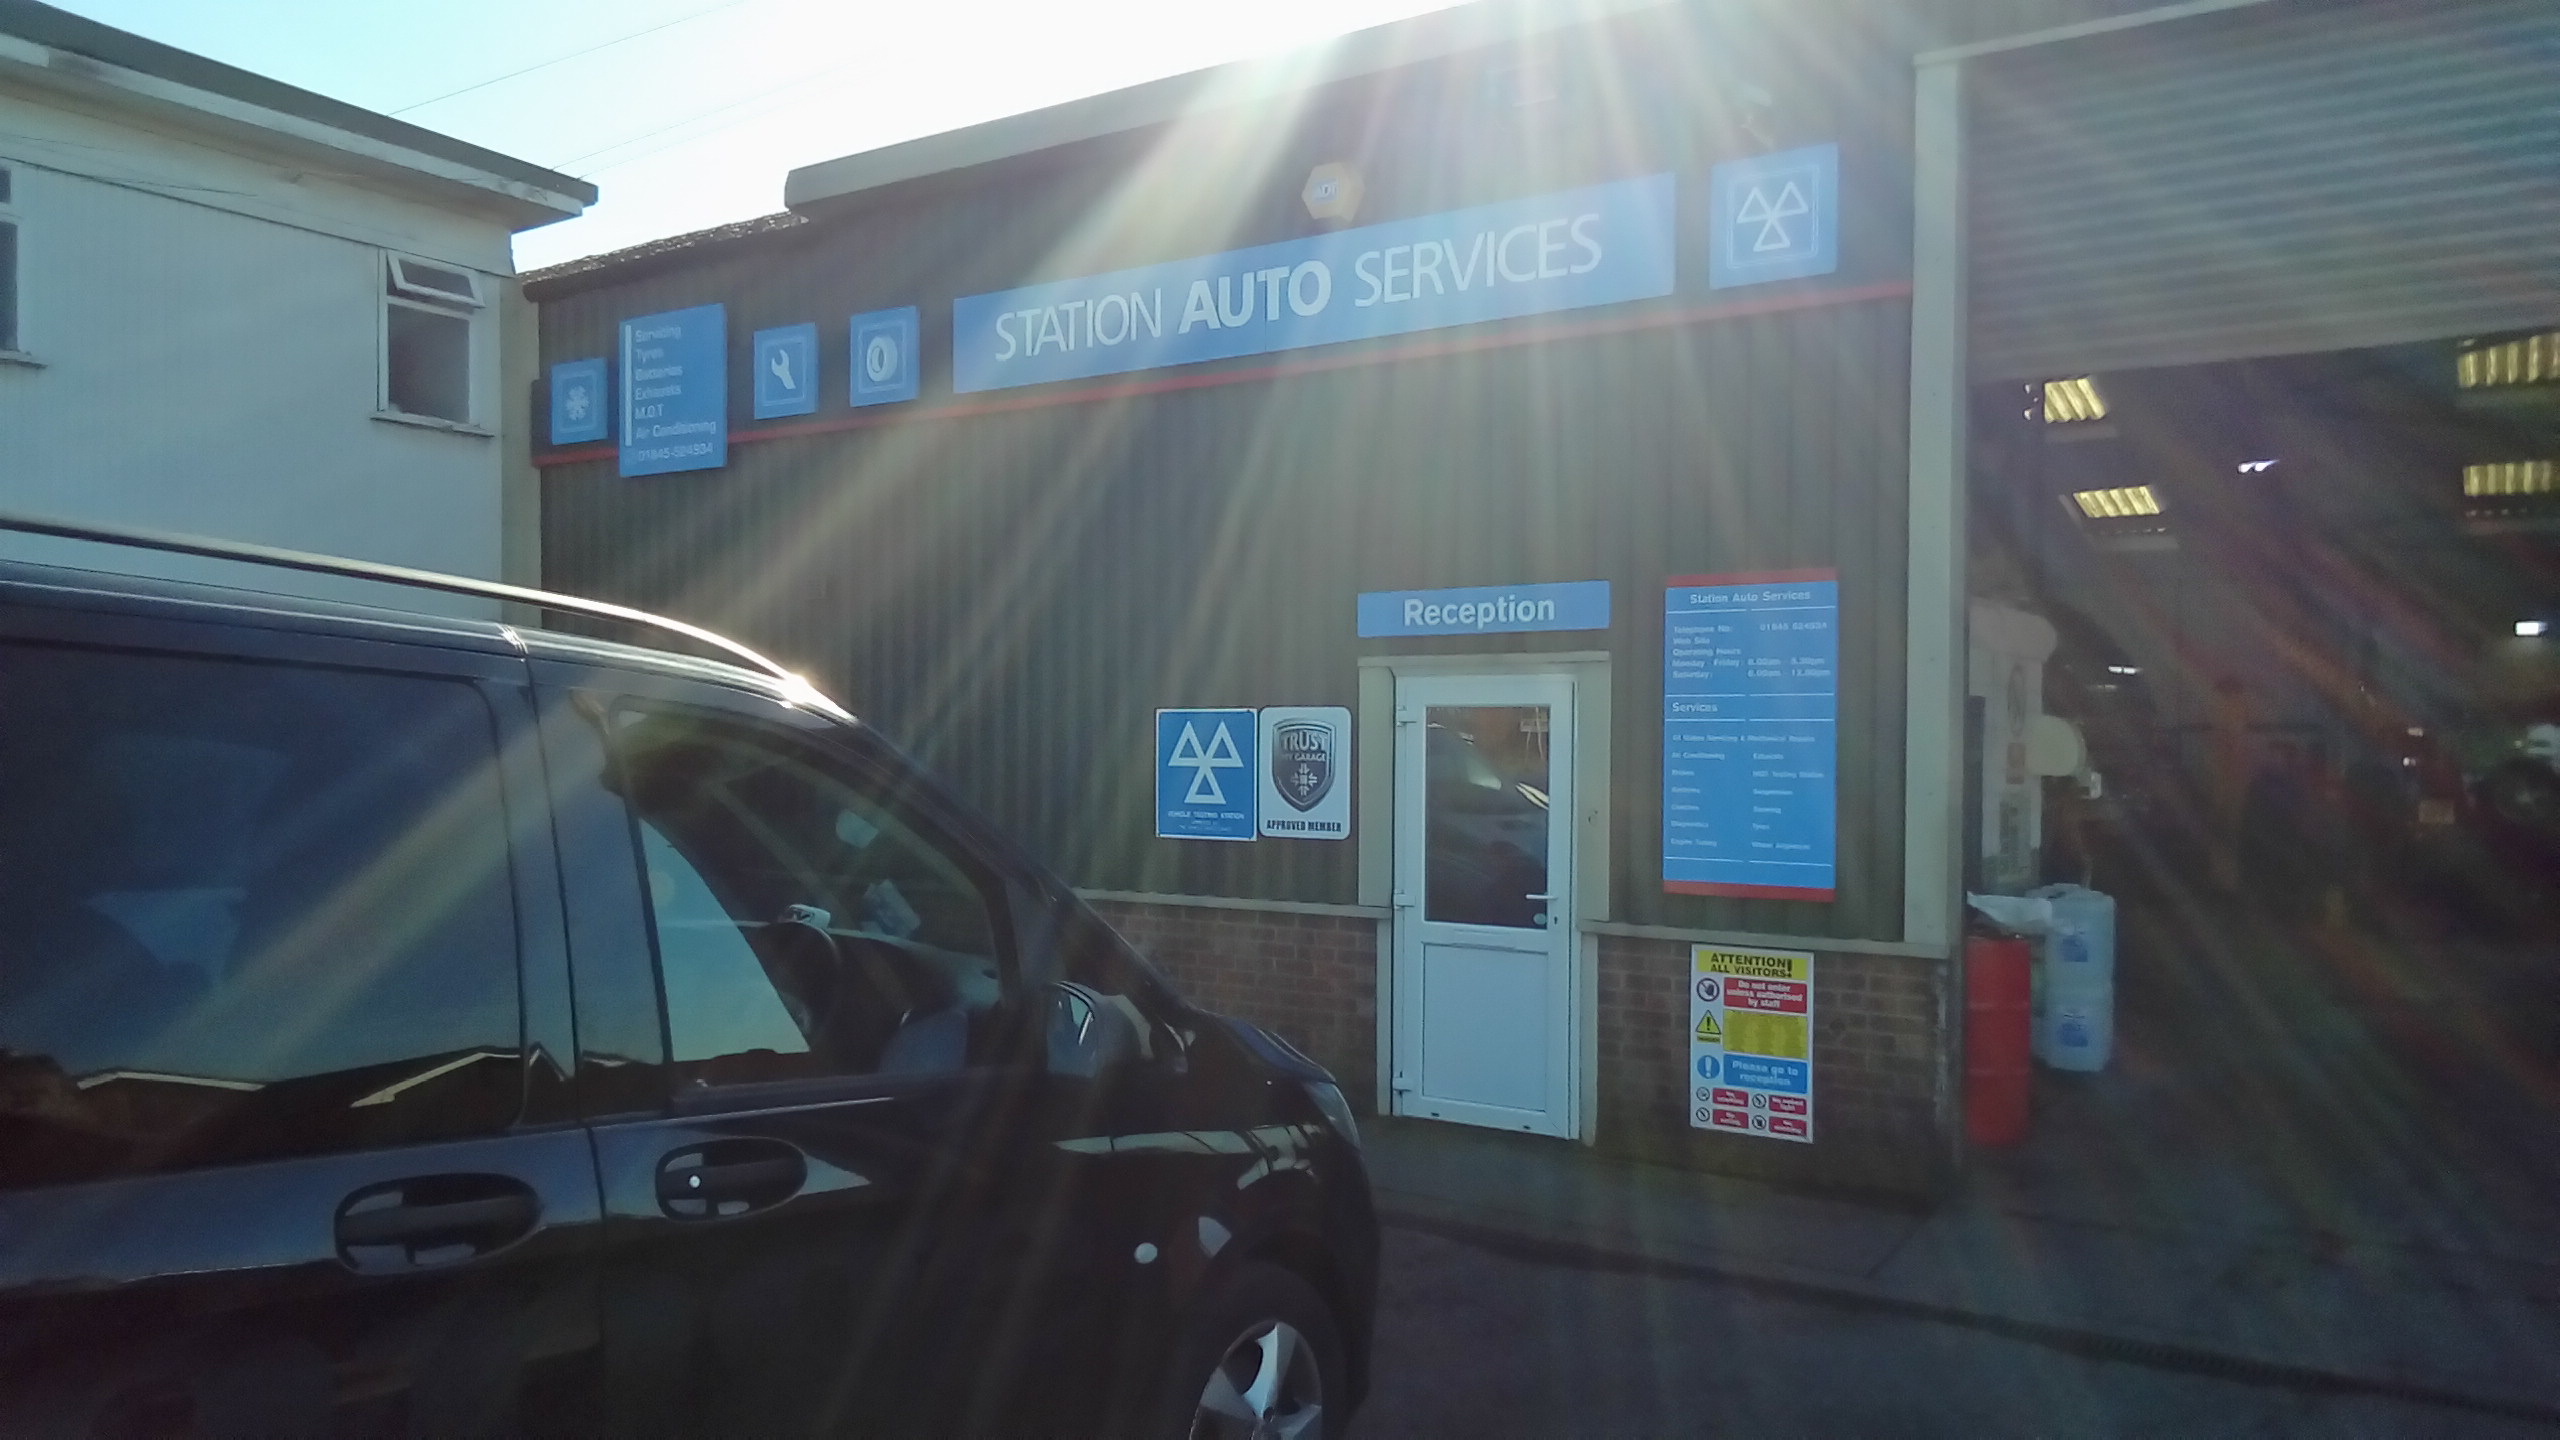 Image 5 of Station Auto Services